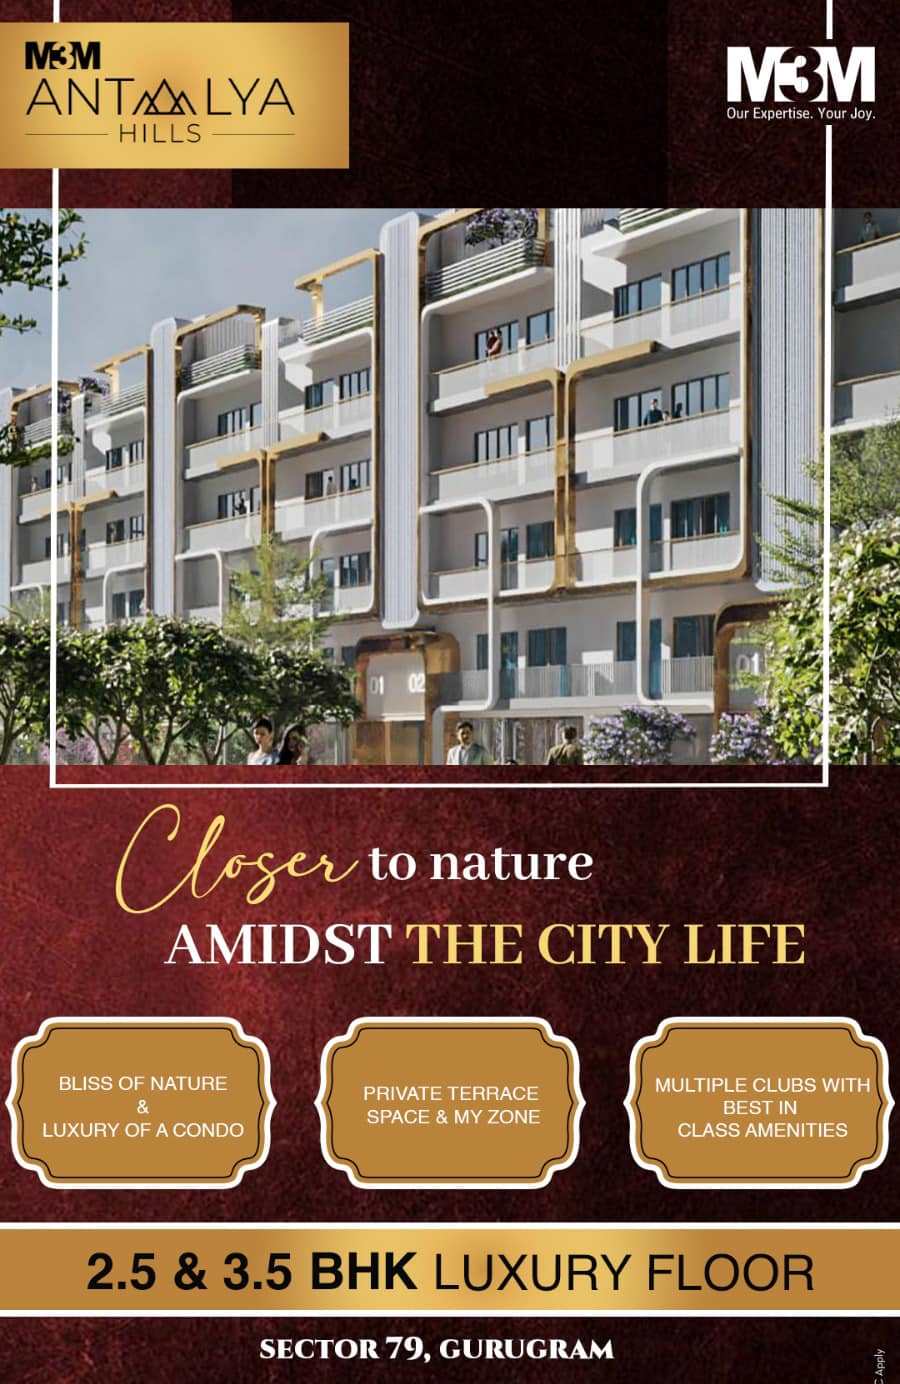 Multiple Clubs with the best amenities at M3M Antalya Hills in Sector 79, Gurgaon Update